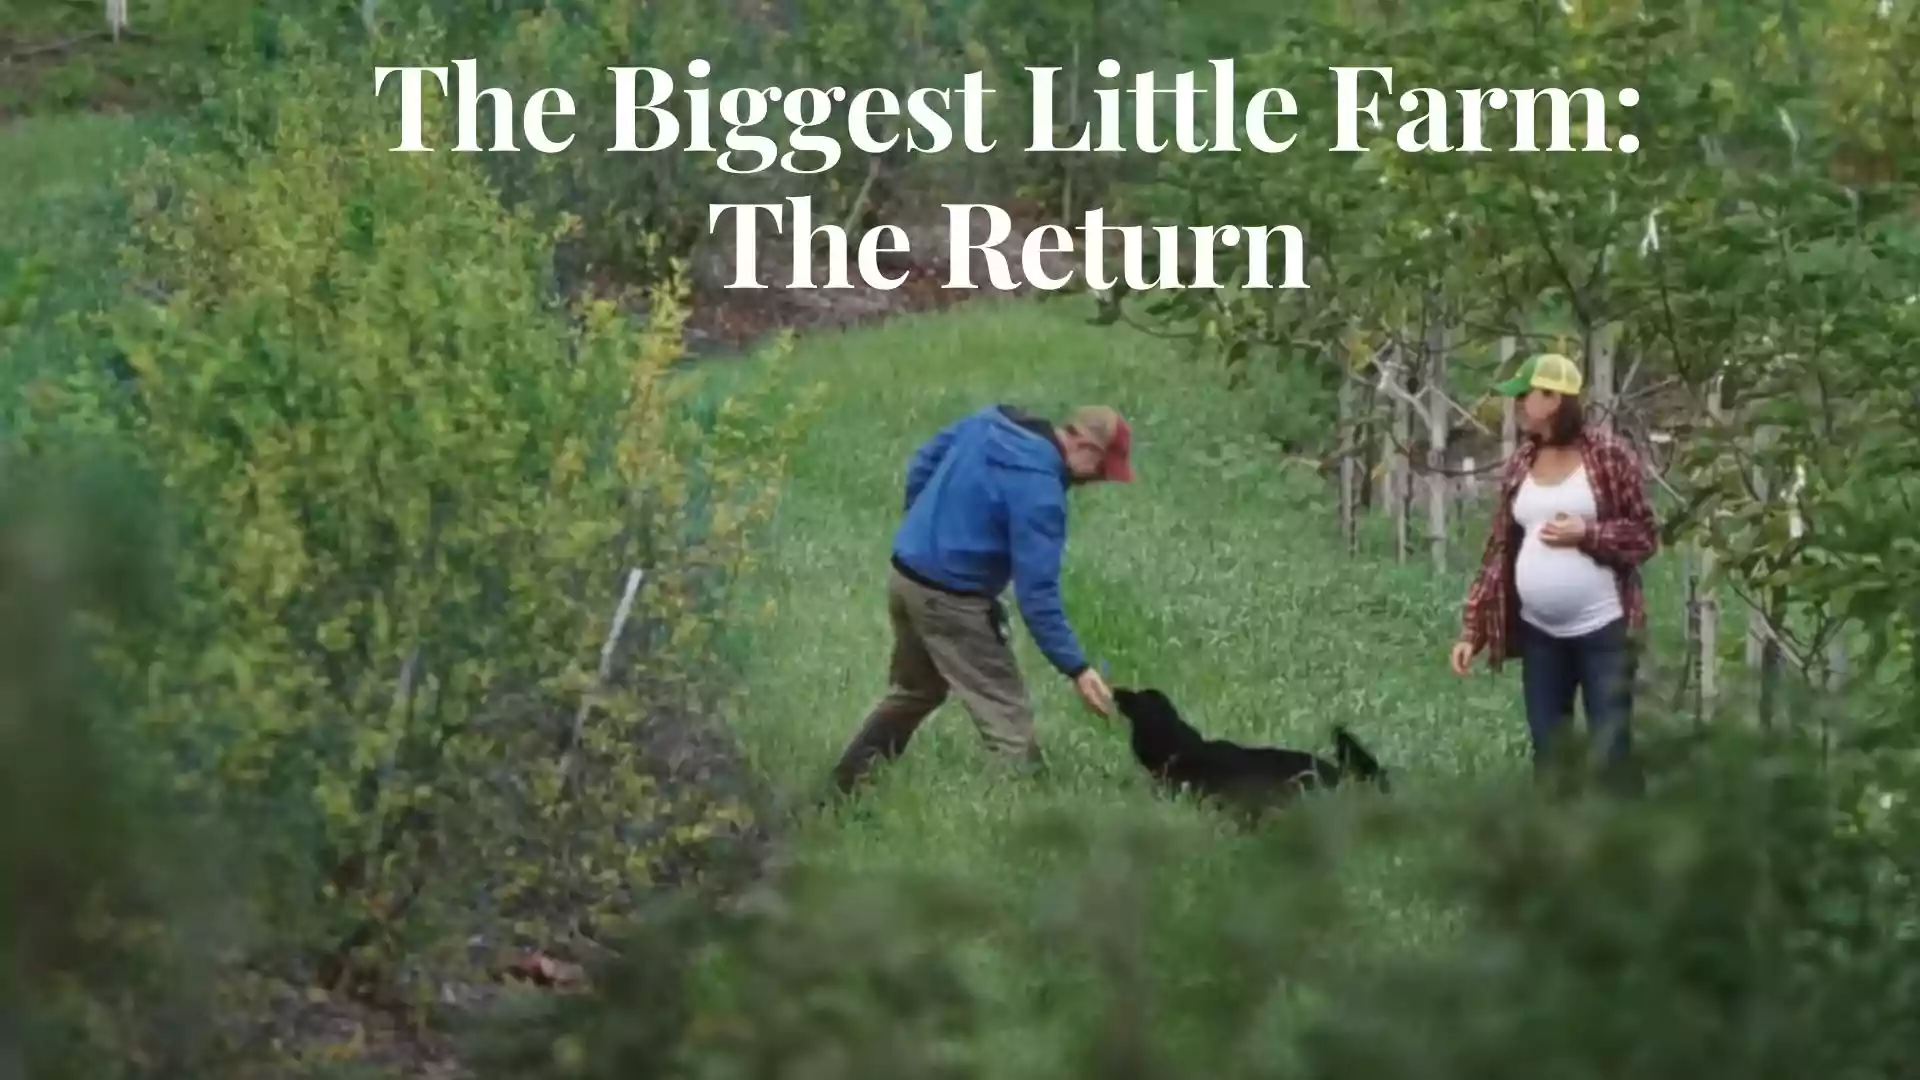 The Biggest Little Farm The Return Wallpaper and Image